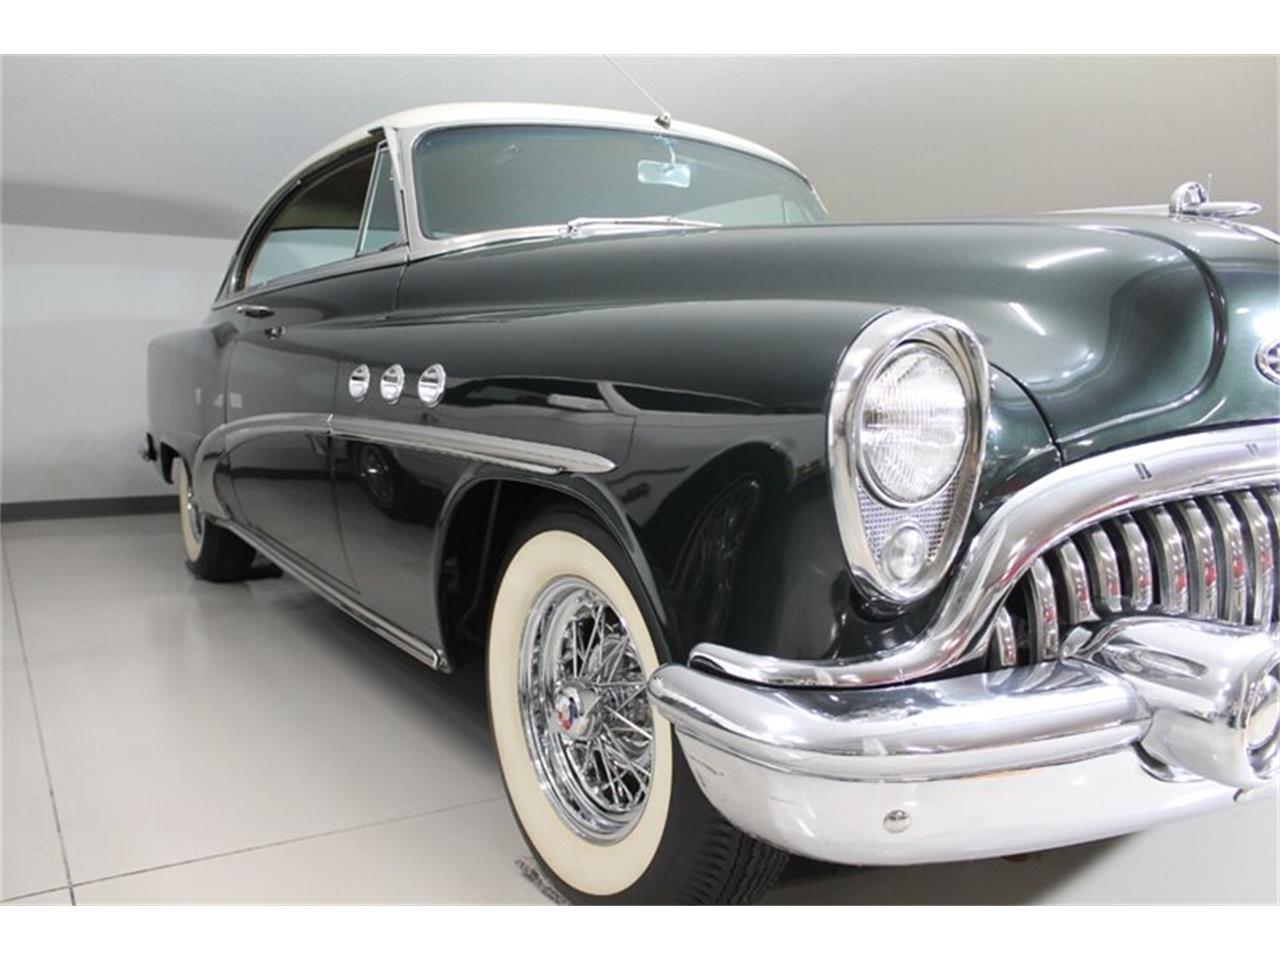 For Sale: 1953 Buick Special in Fort Wayne, Indiana for sale in Fort Wayne, IN